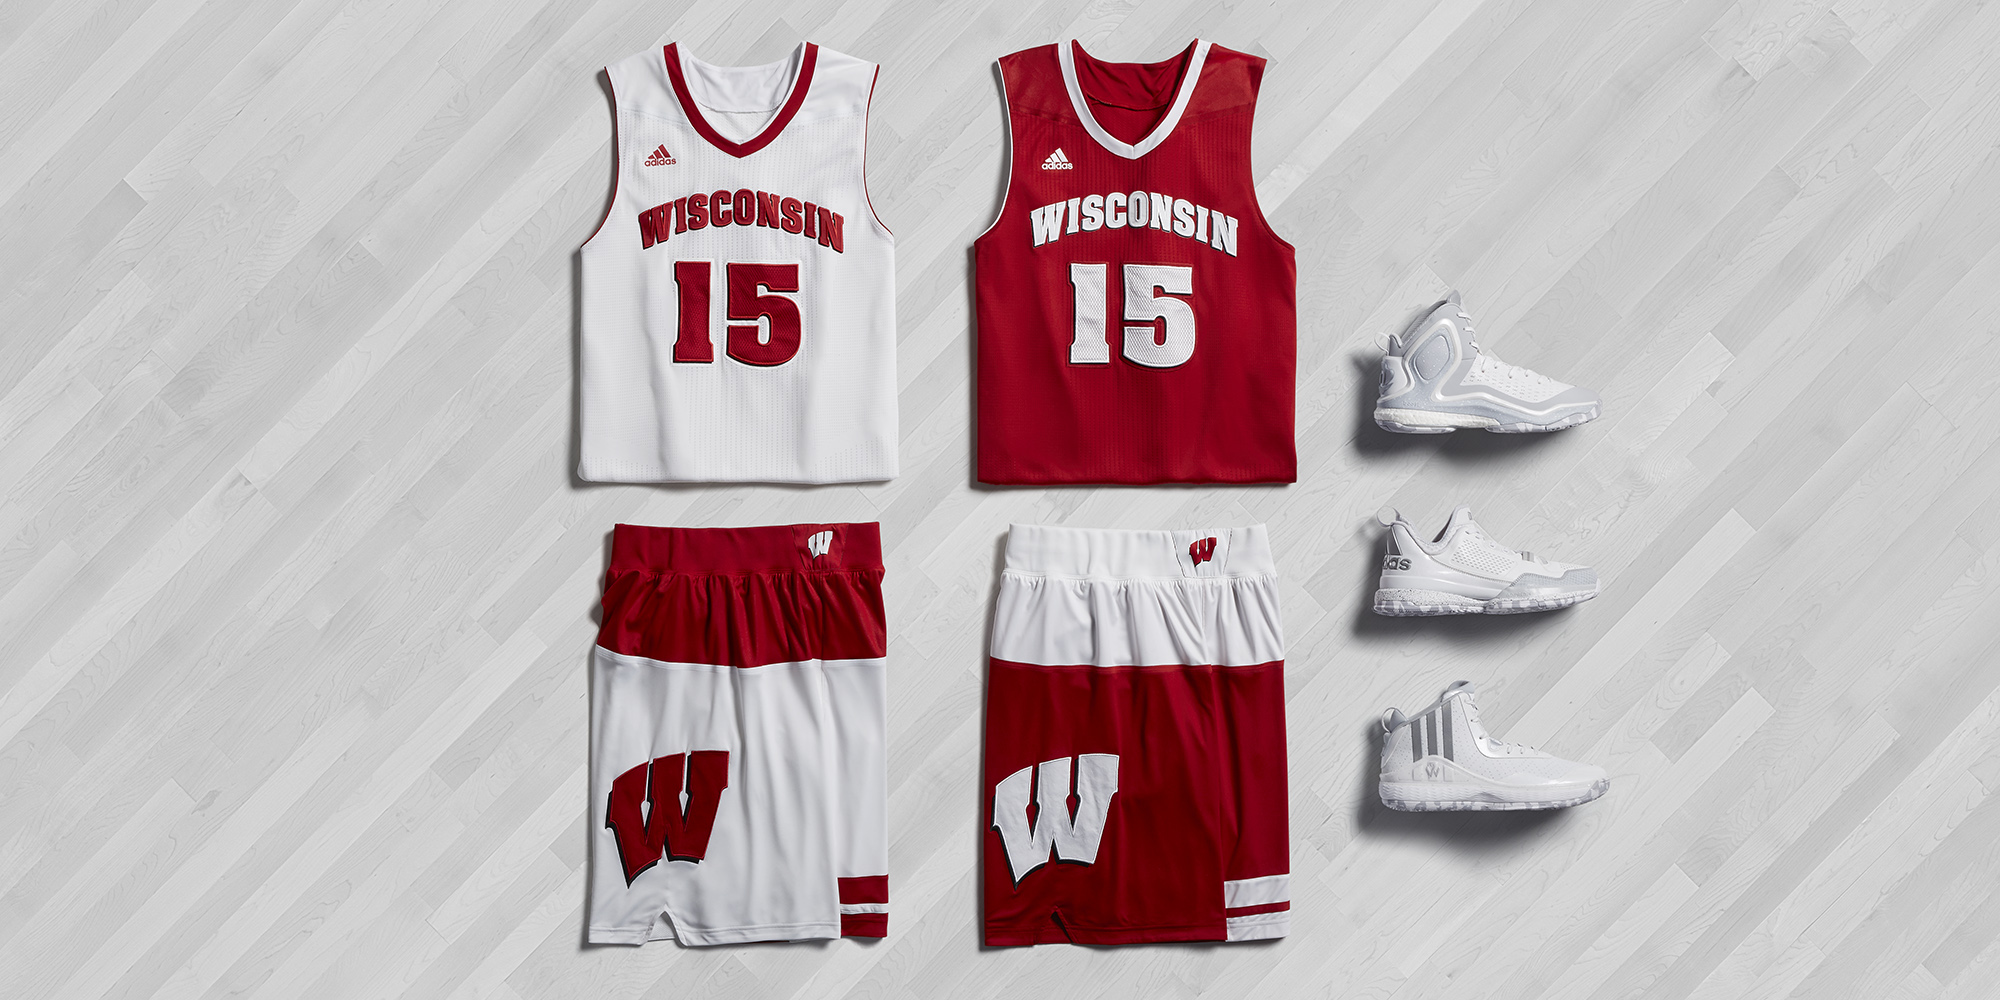 adidas Made in March collection for Wisconsin